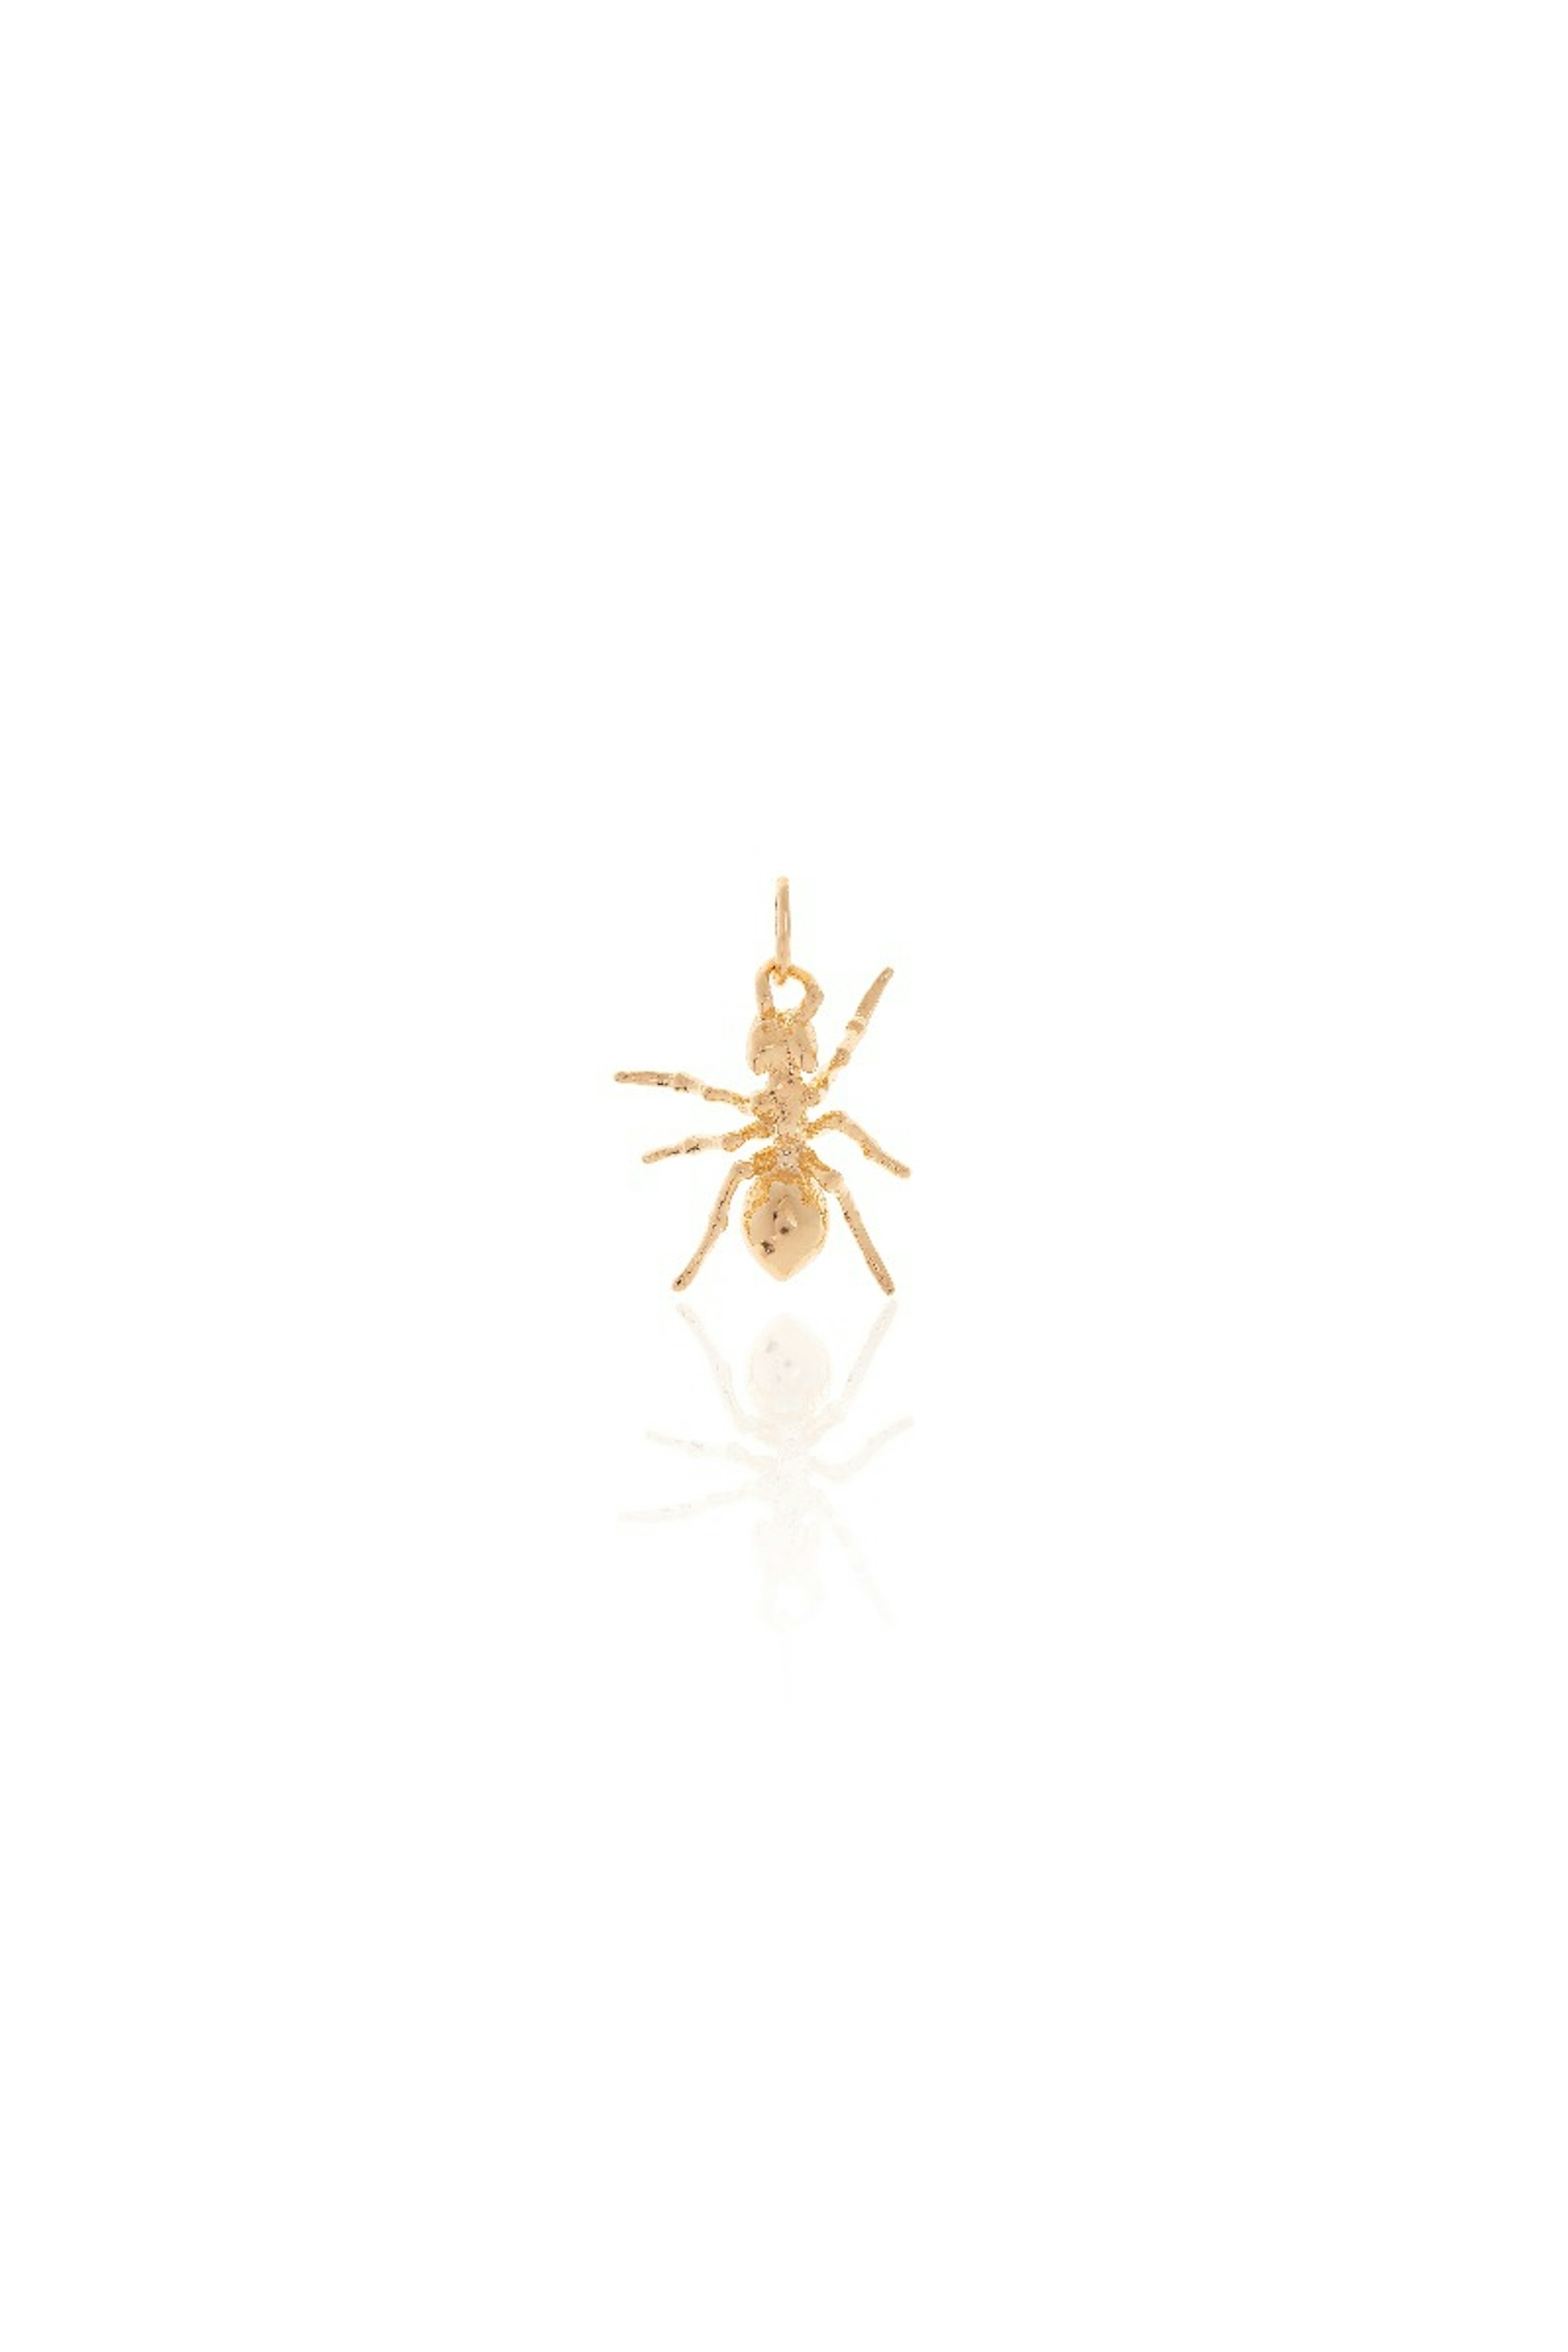 Gold Ant Charm